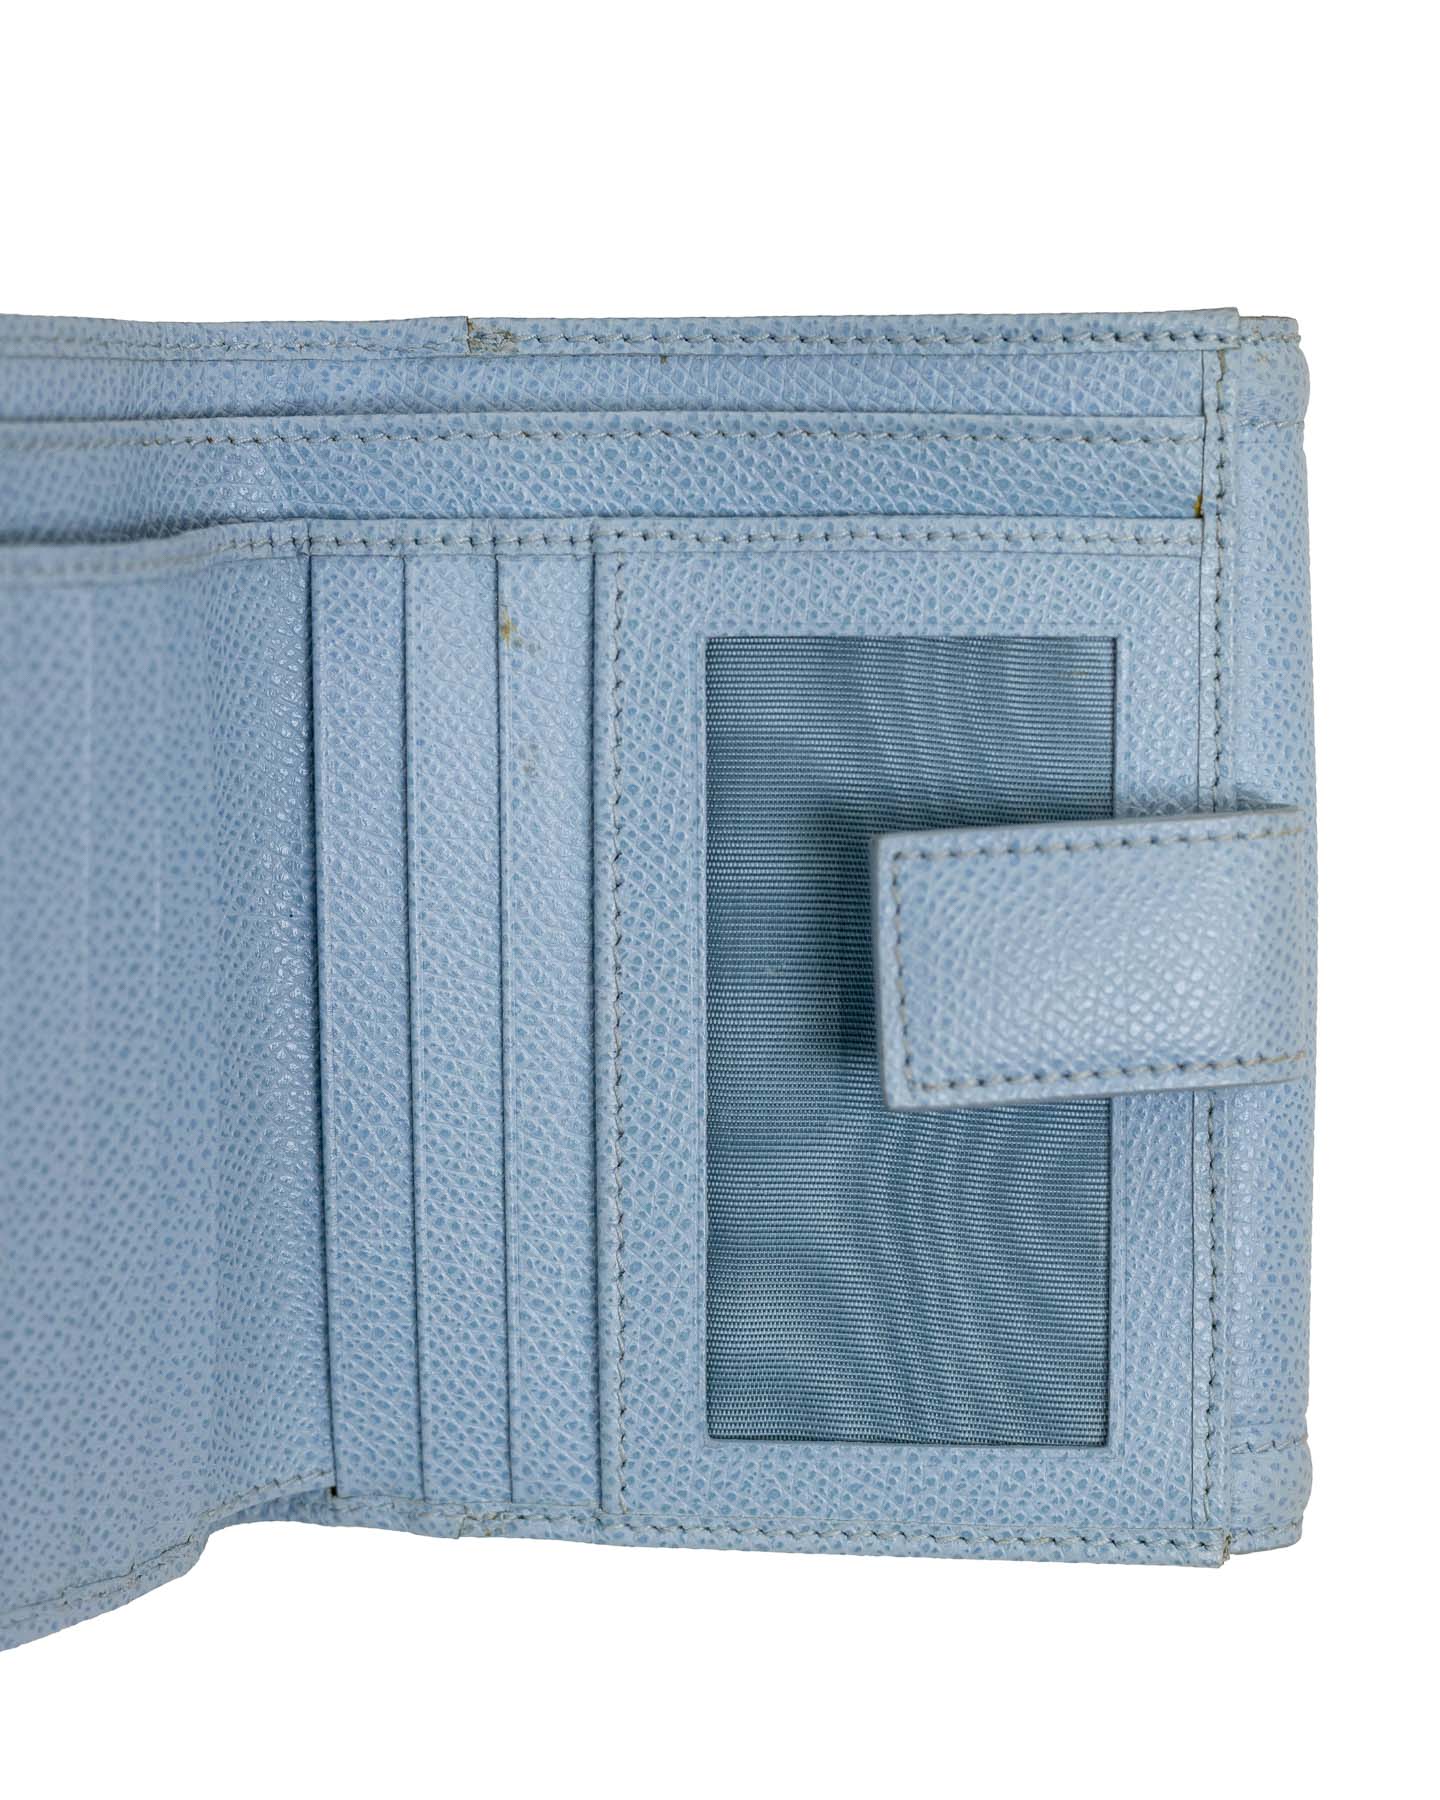 Salvatore Ferragamo Baby Blue Leather Wallet - with dust bag